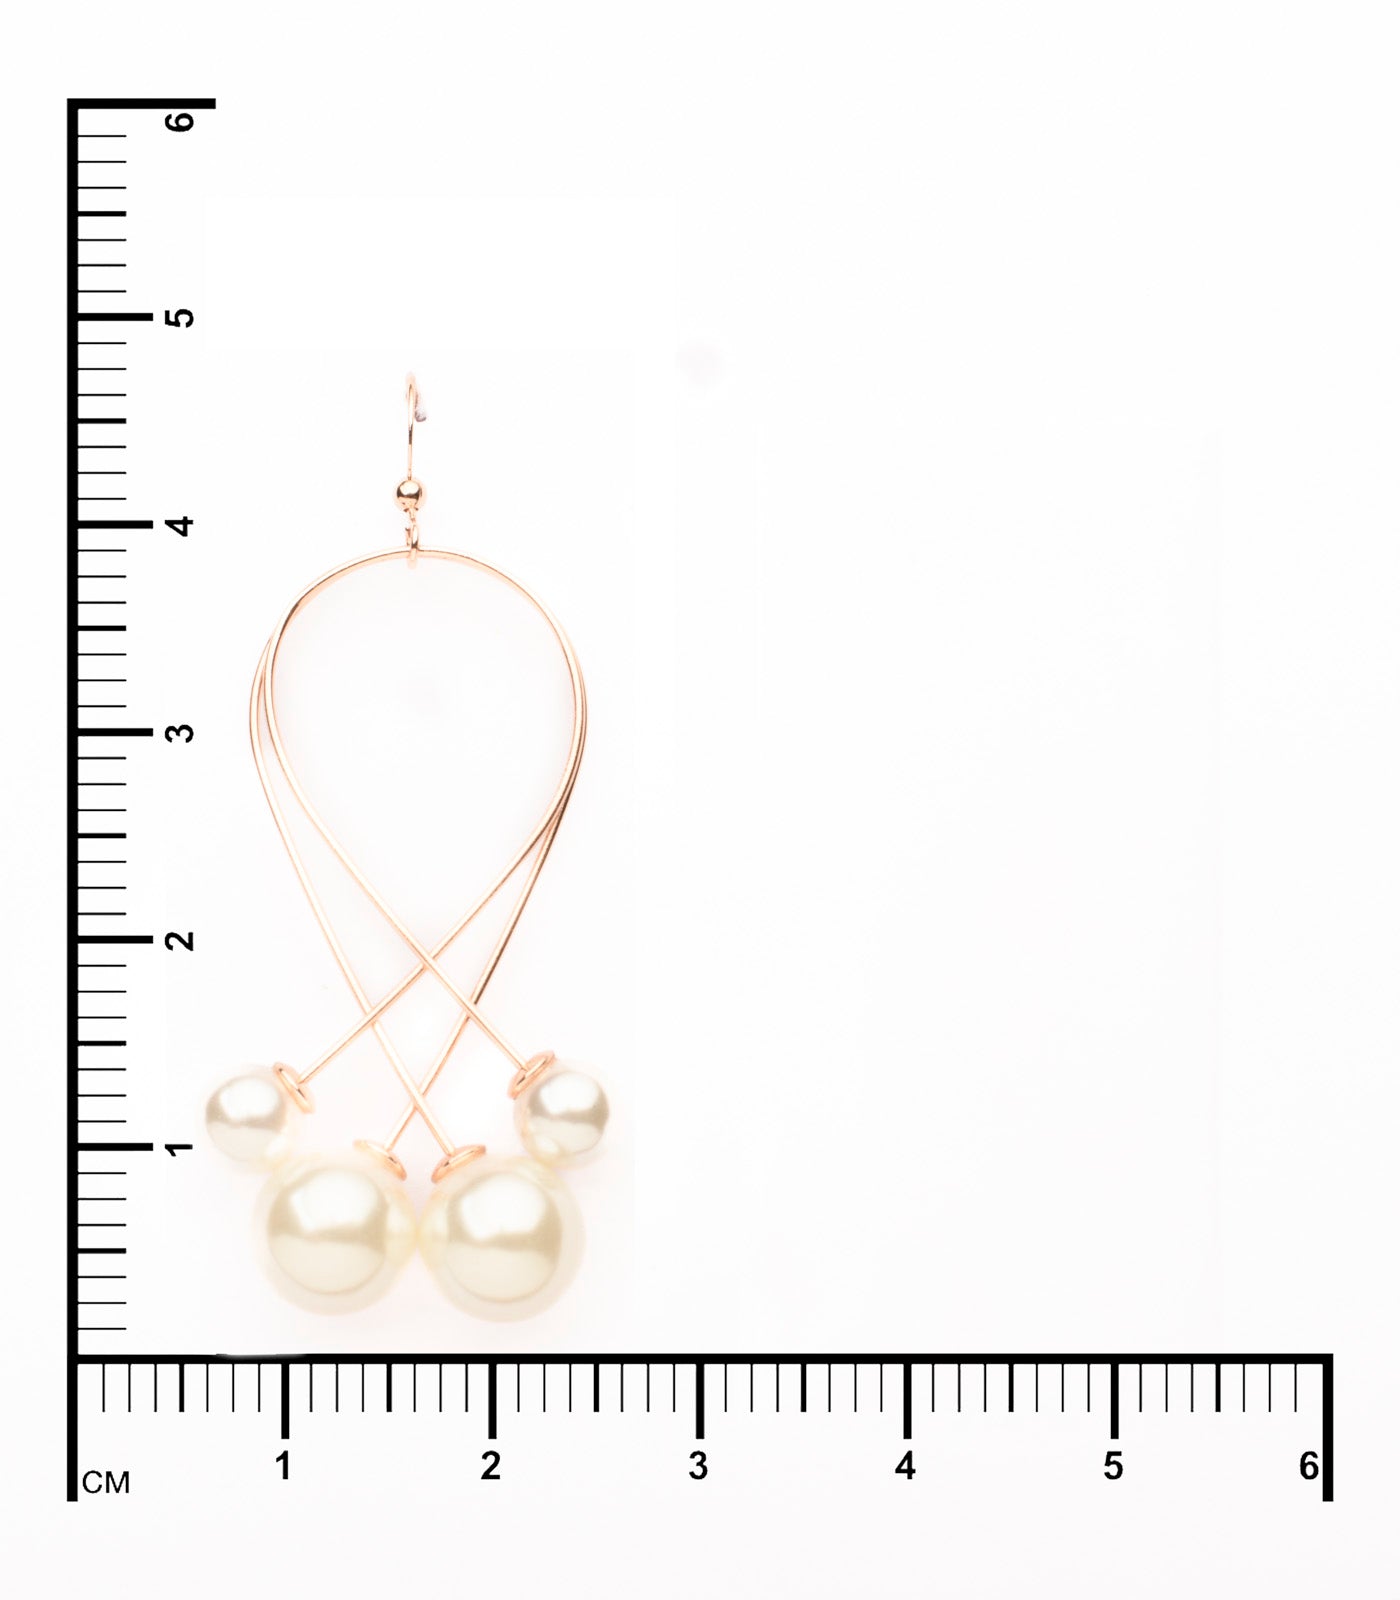 Hand-Crafted Shiny Falling Pearls Earrings (Brass)